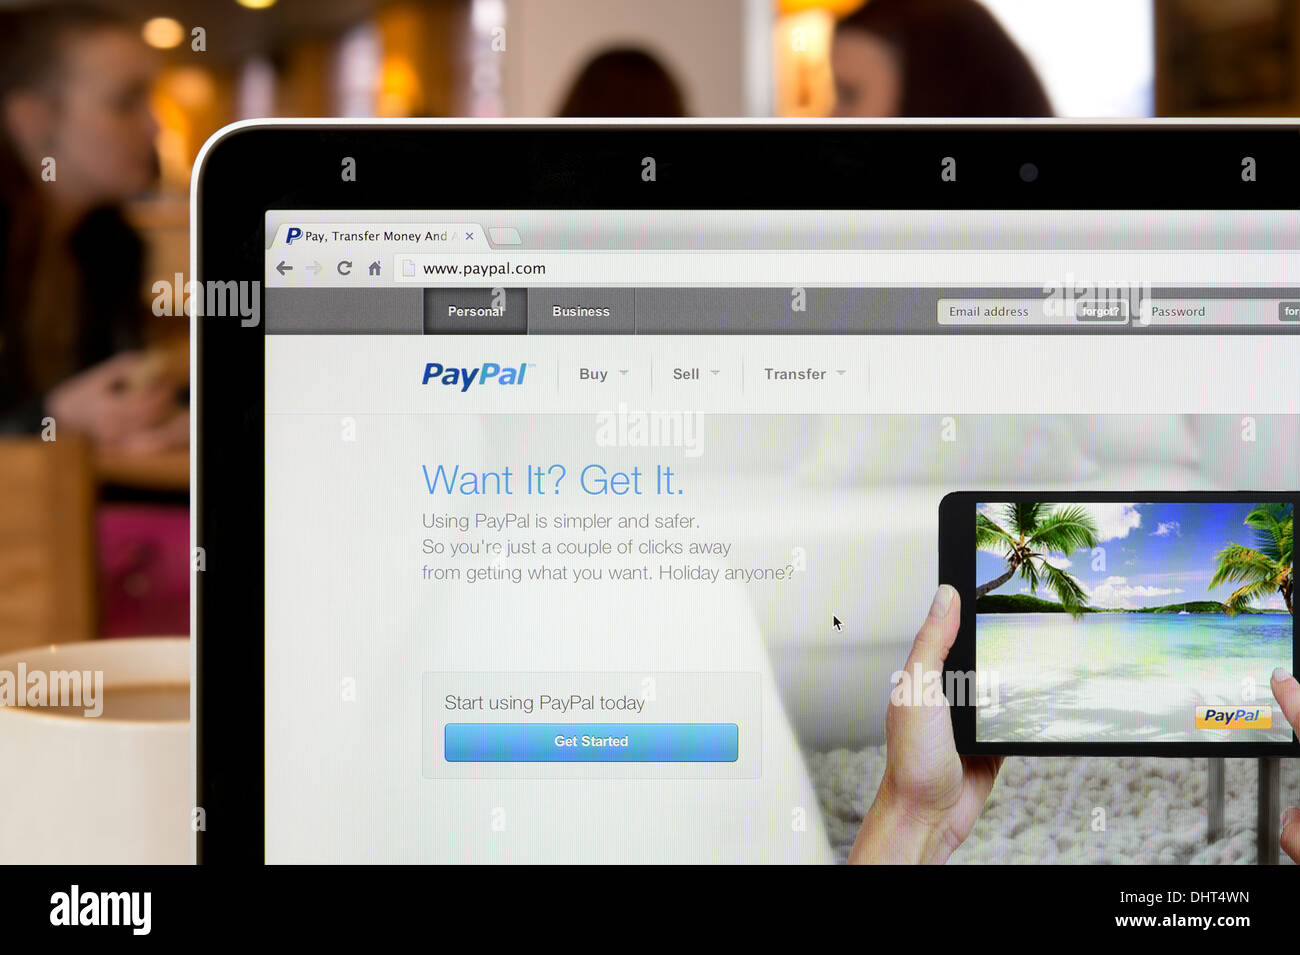 The PayPal website shot in a coffee shop environment (Editorial use only: print, TV, e-book and editorial website). Stock Photo